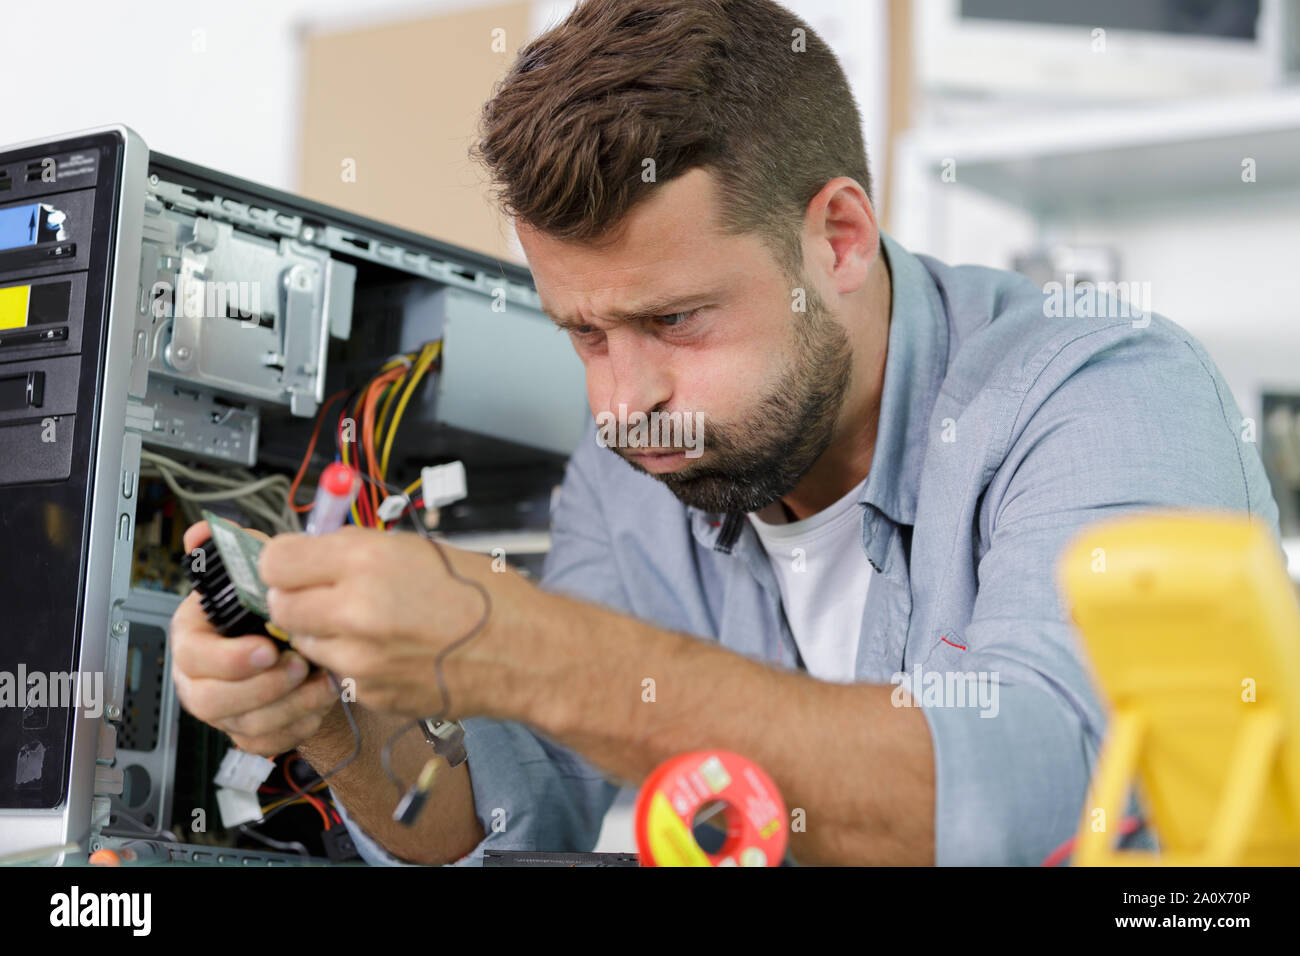 upset technician lost with all the cables Stock Photo